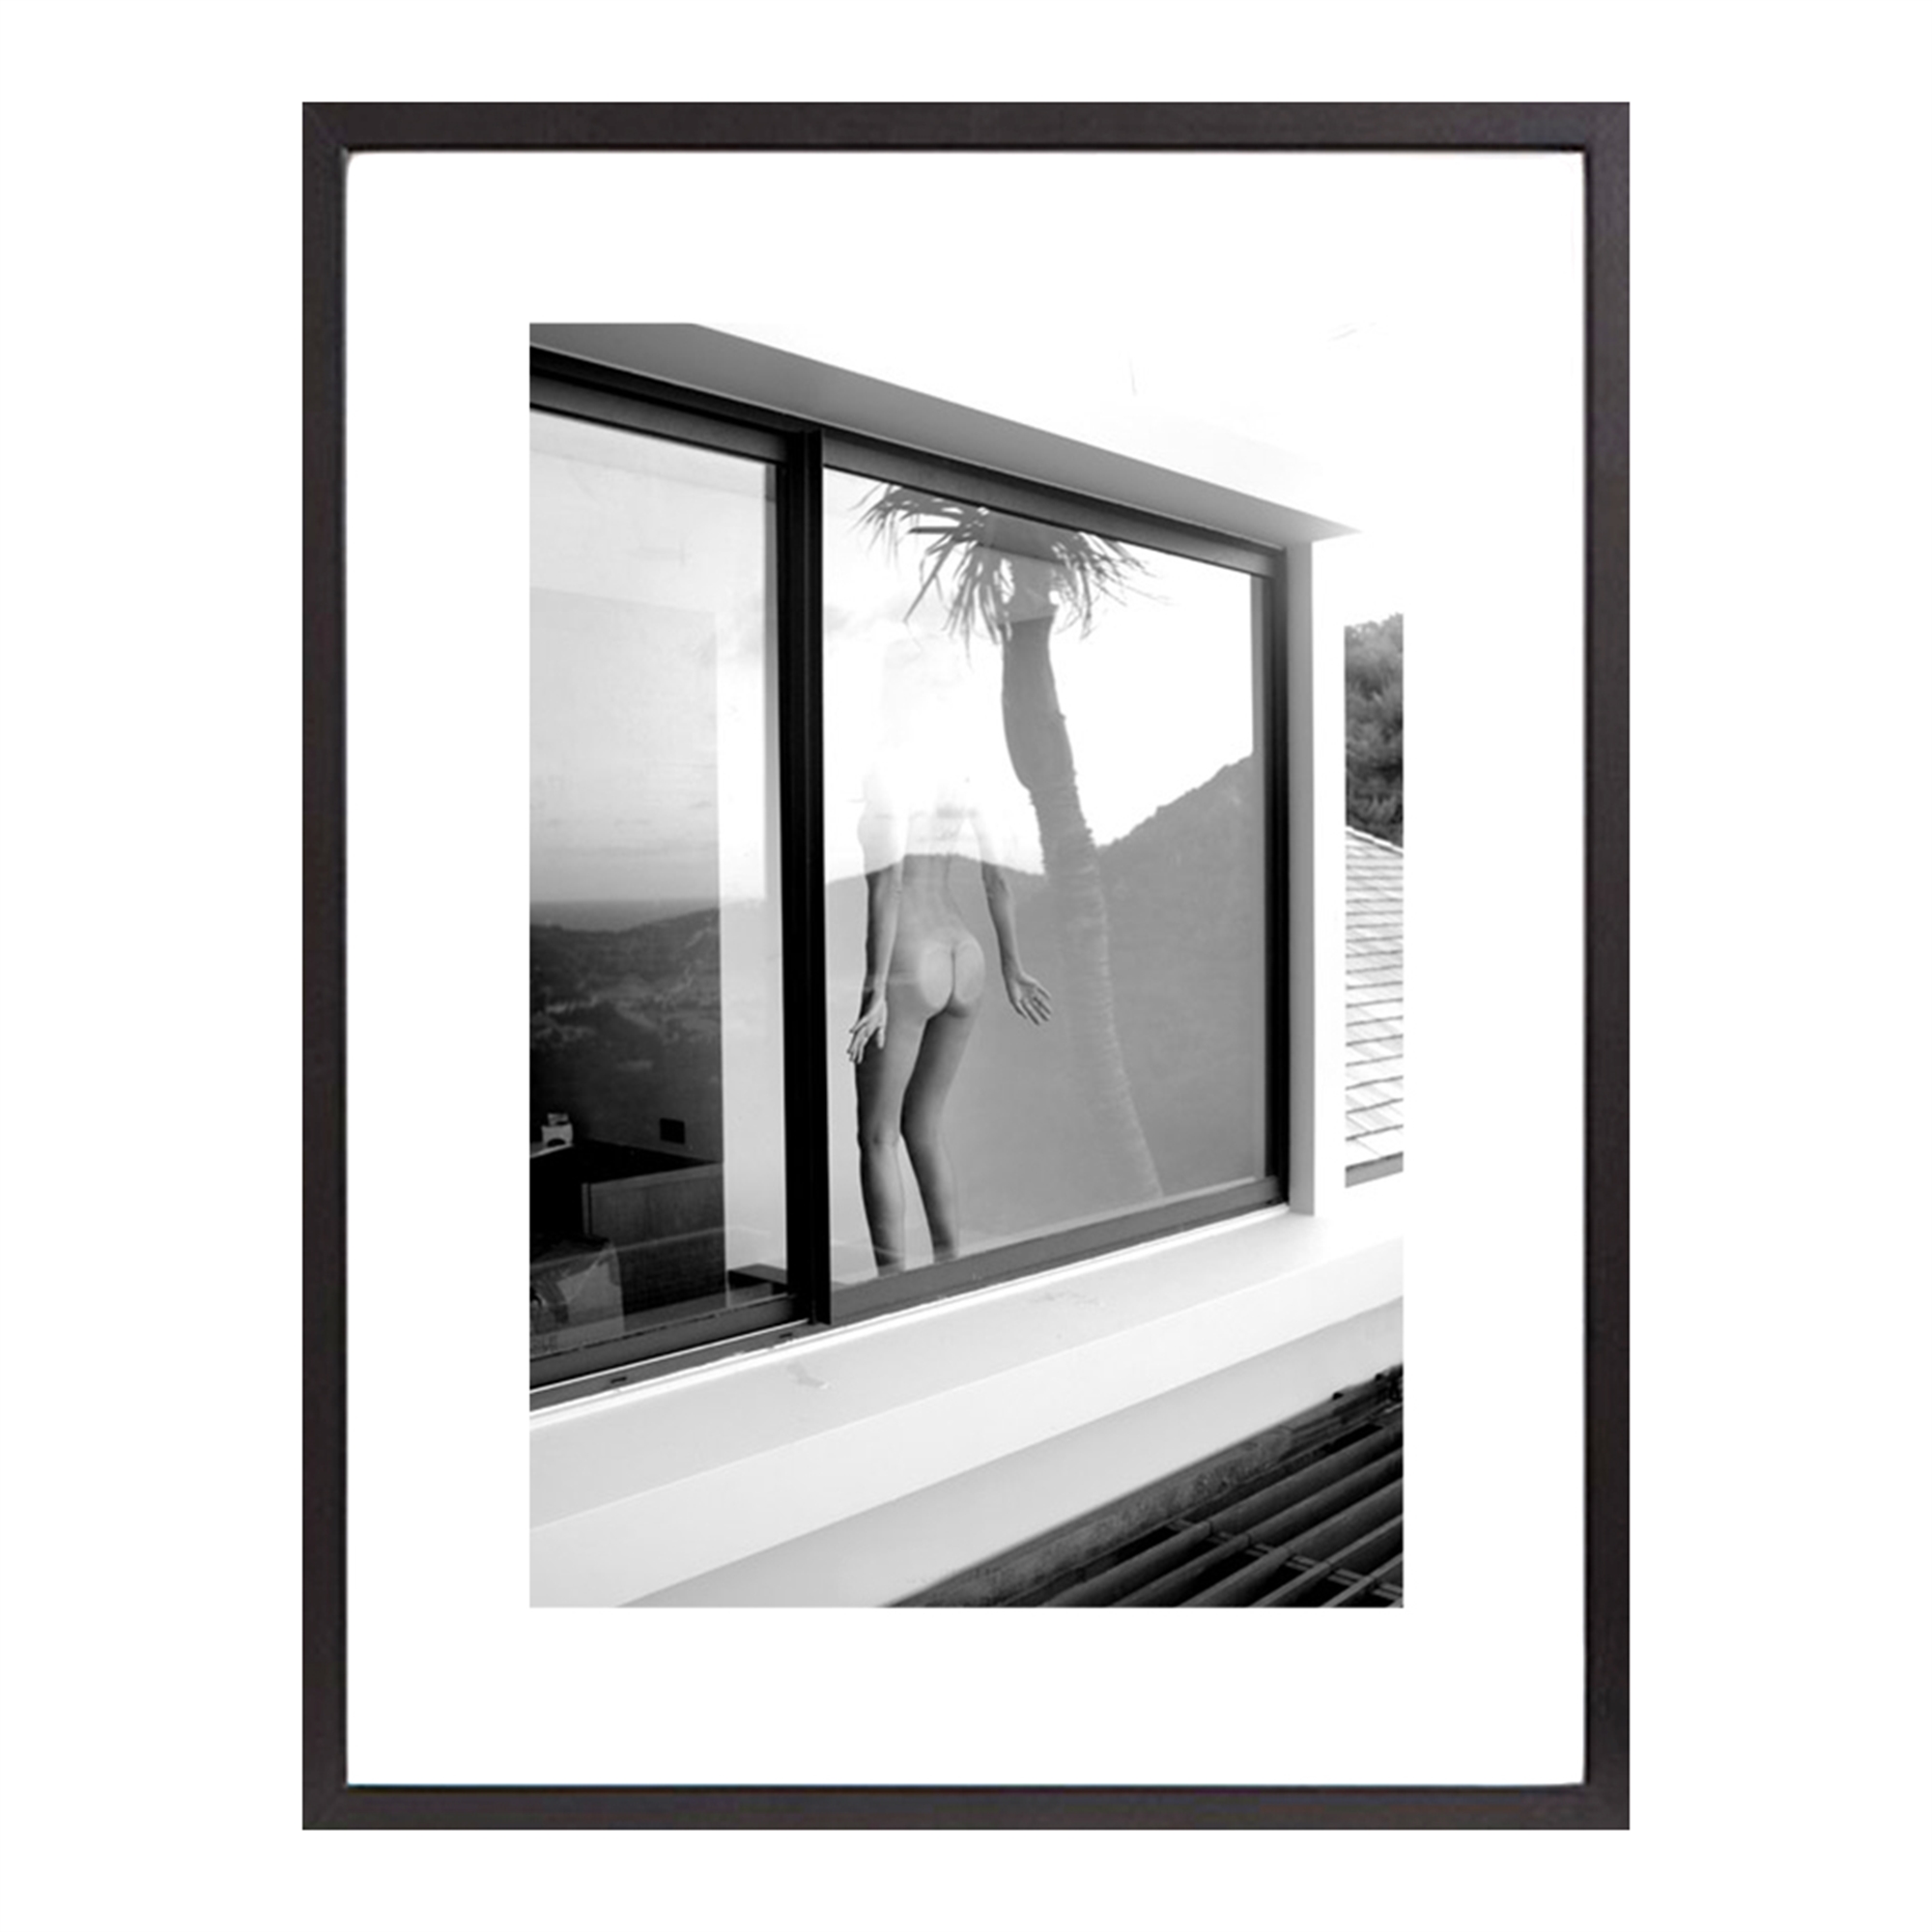 Room with a view (St Barth) by Jean-Philippe Piter | Space Gallery St Barth